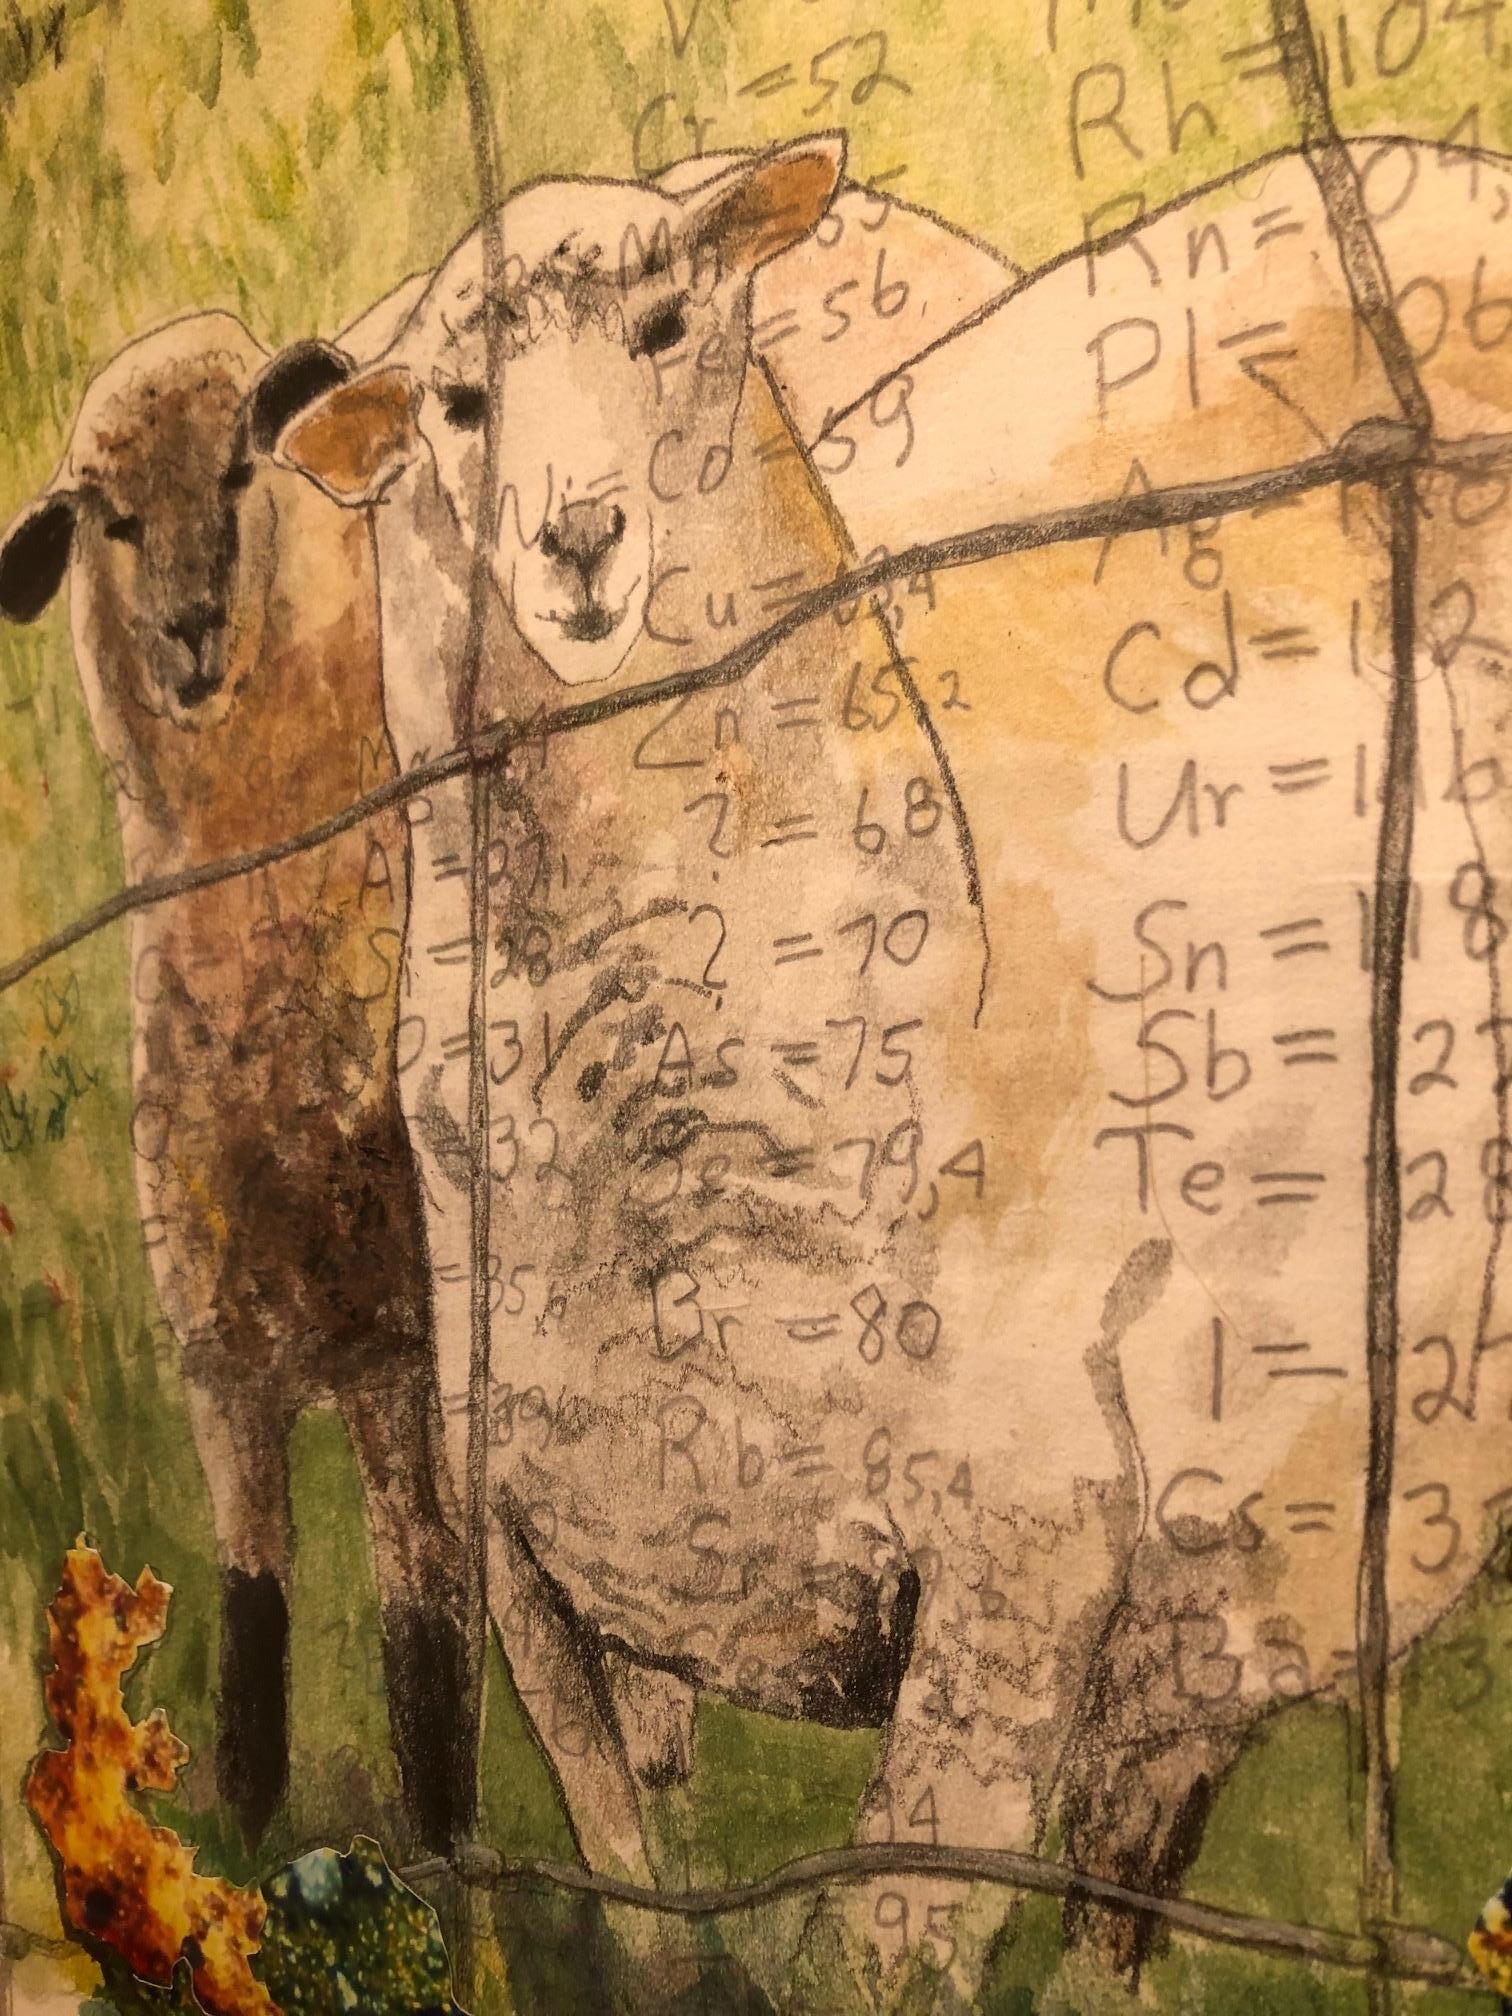 Drawn to nature and Greek mythology, Marcia Scanlon works with mixed media on paper to layer, connect, and reanimate ancient stories. Her works are well-rooted in literature, inspired, in part, by Homer’s Odyssey, Sappho’s poetry, Ovid’s